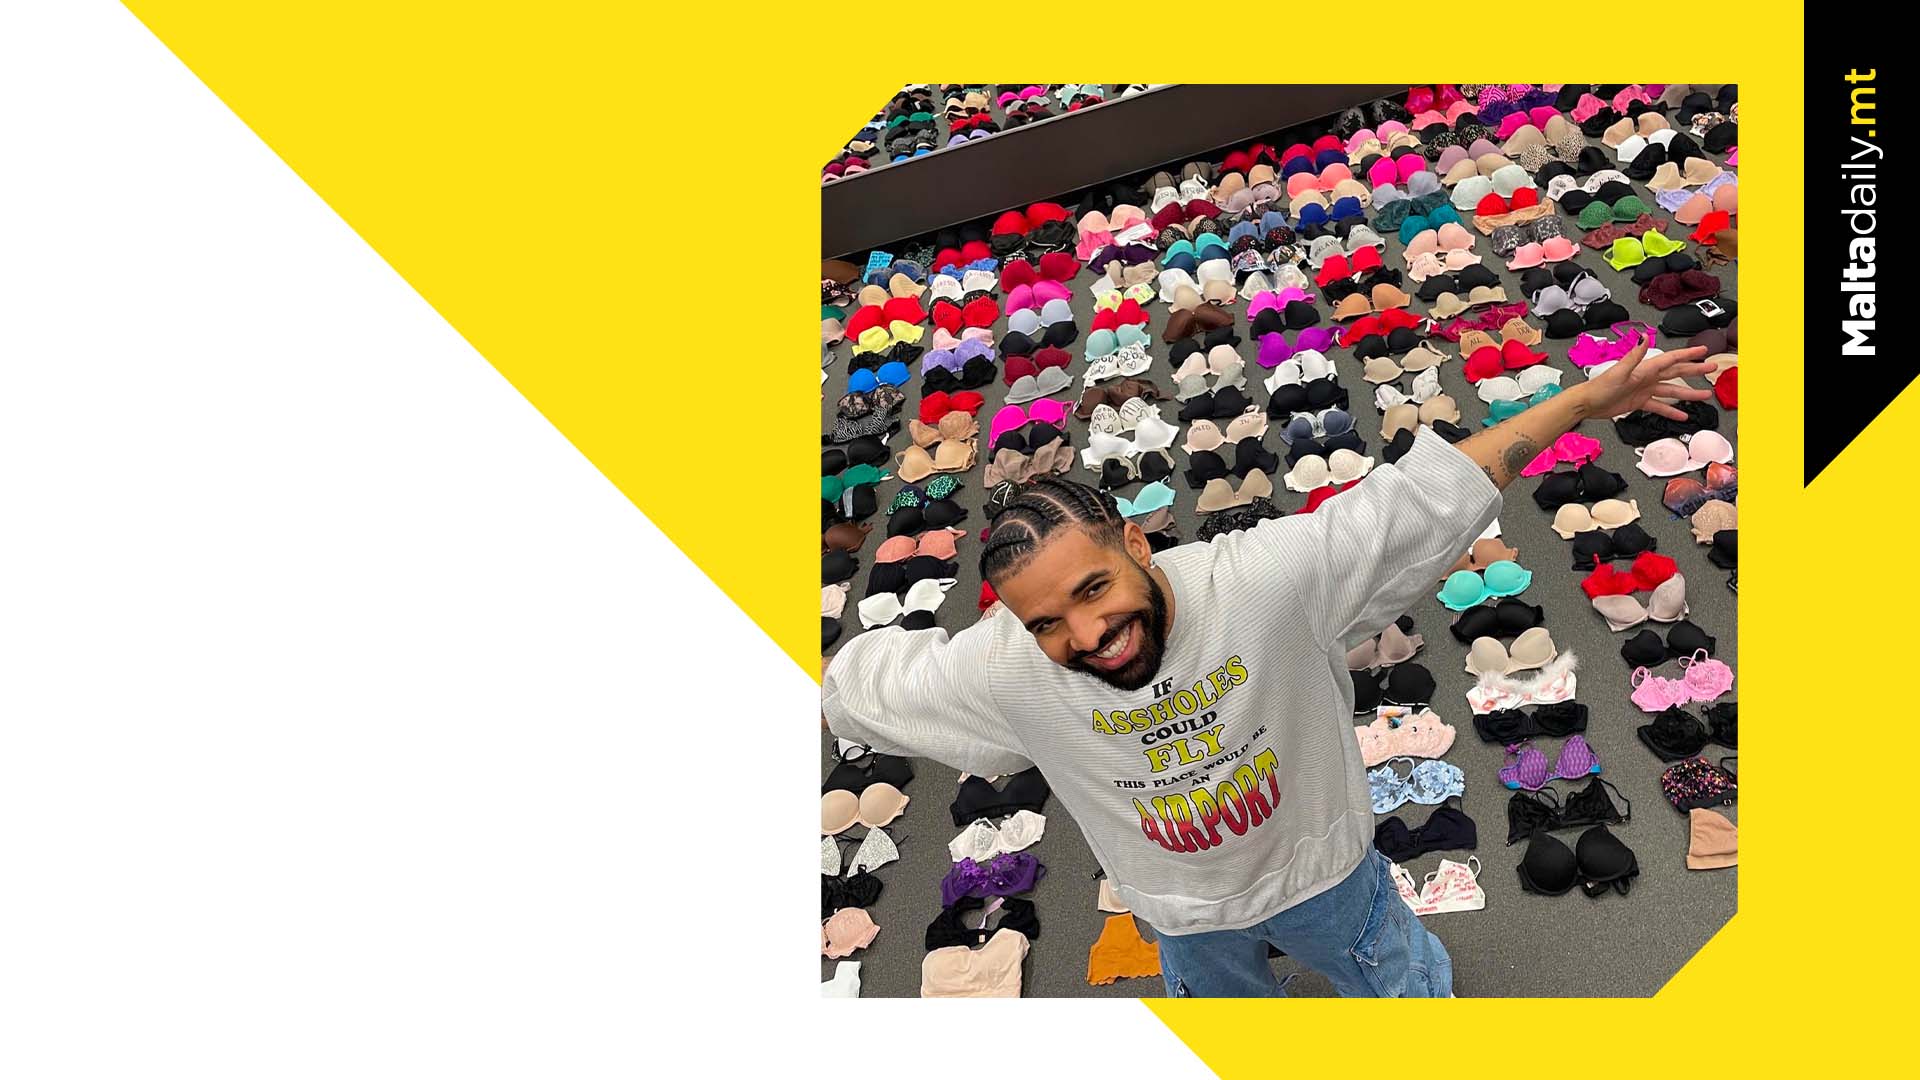 Drake Poses With Collection Of Bras Thrown At Him During Concerts